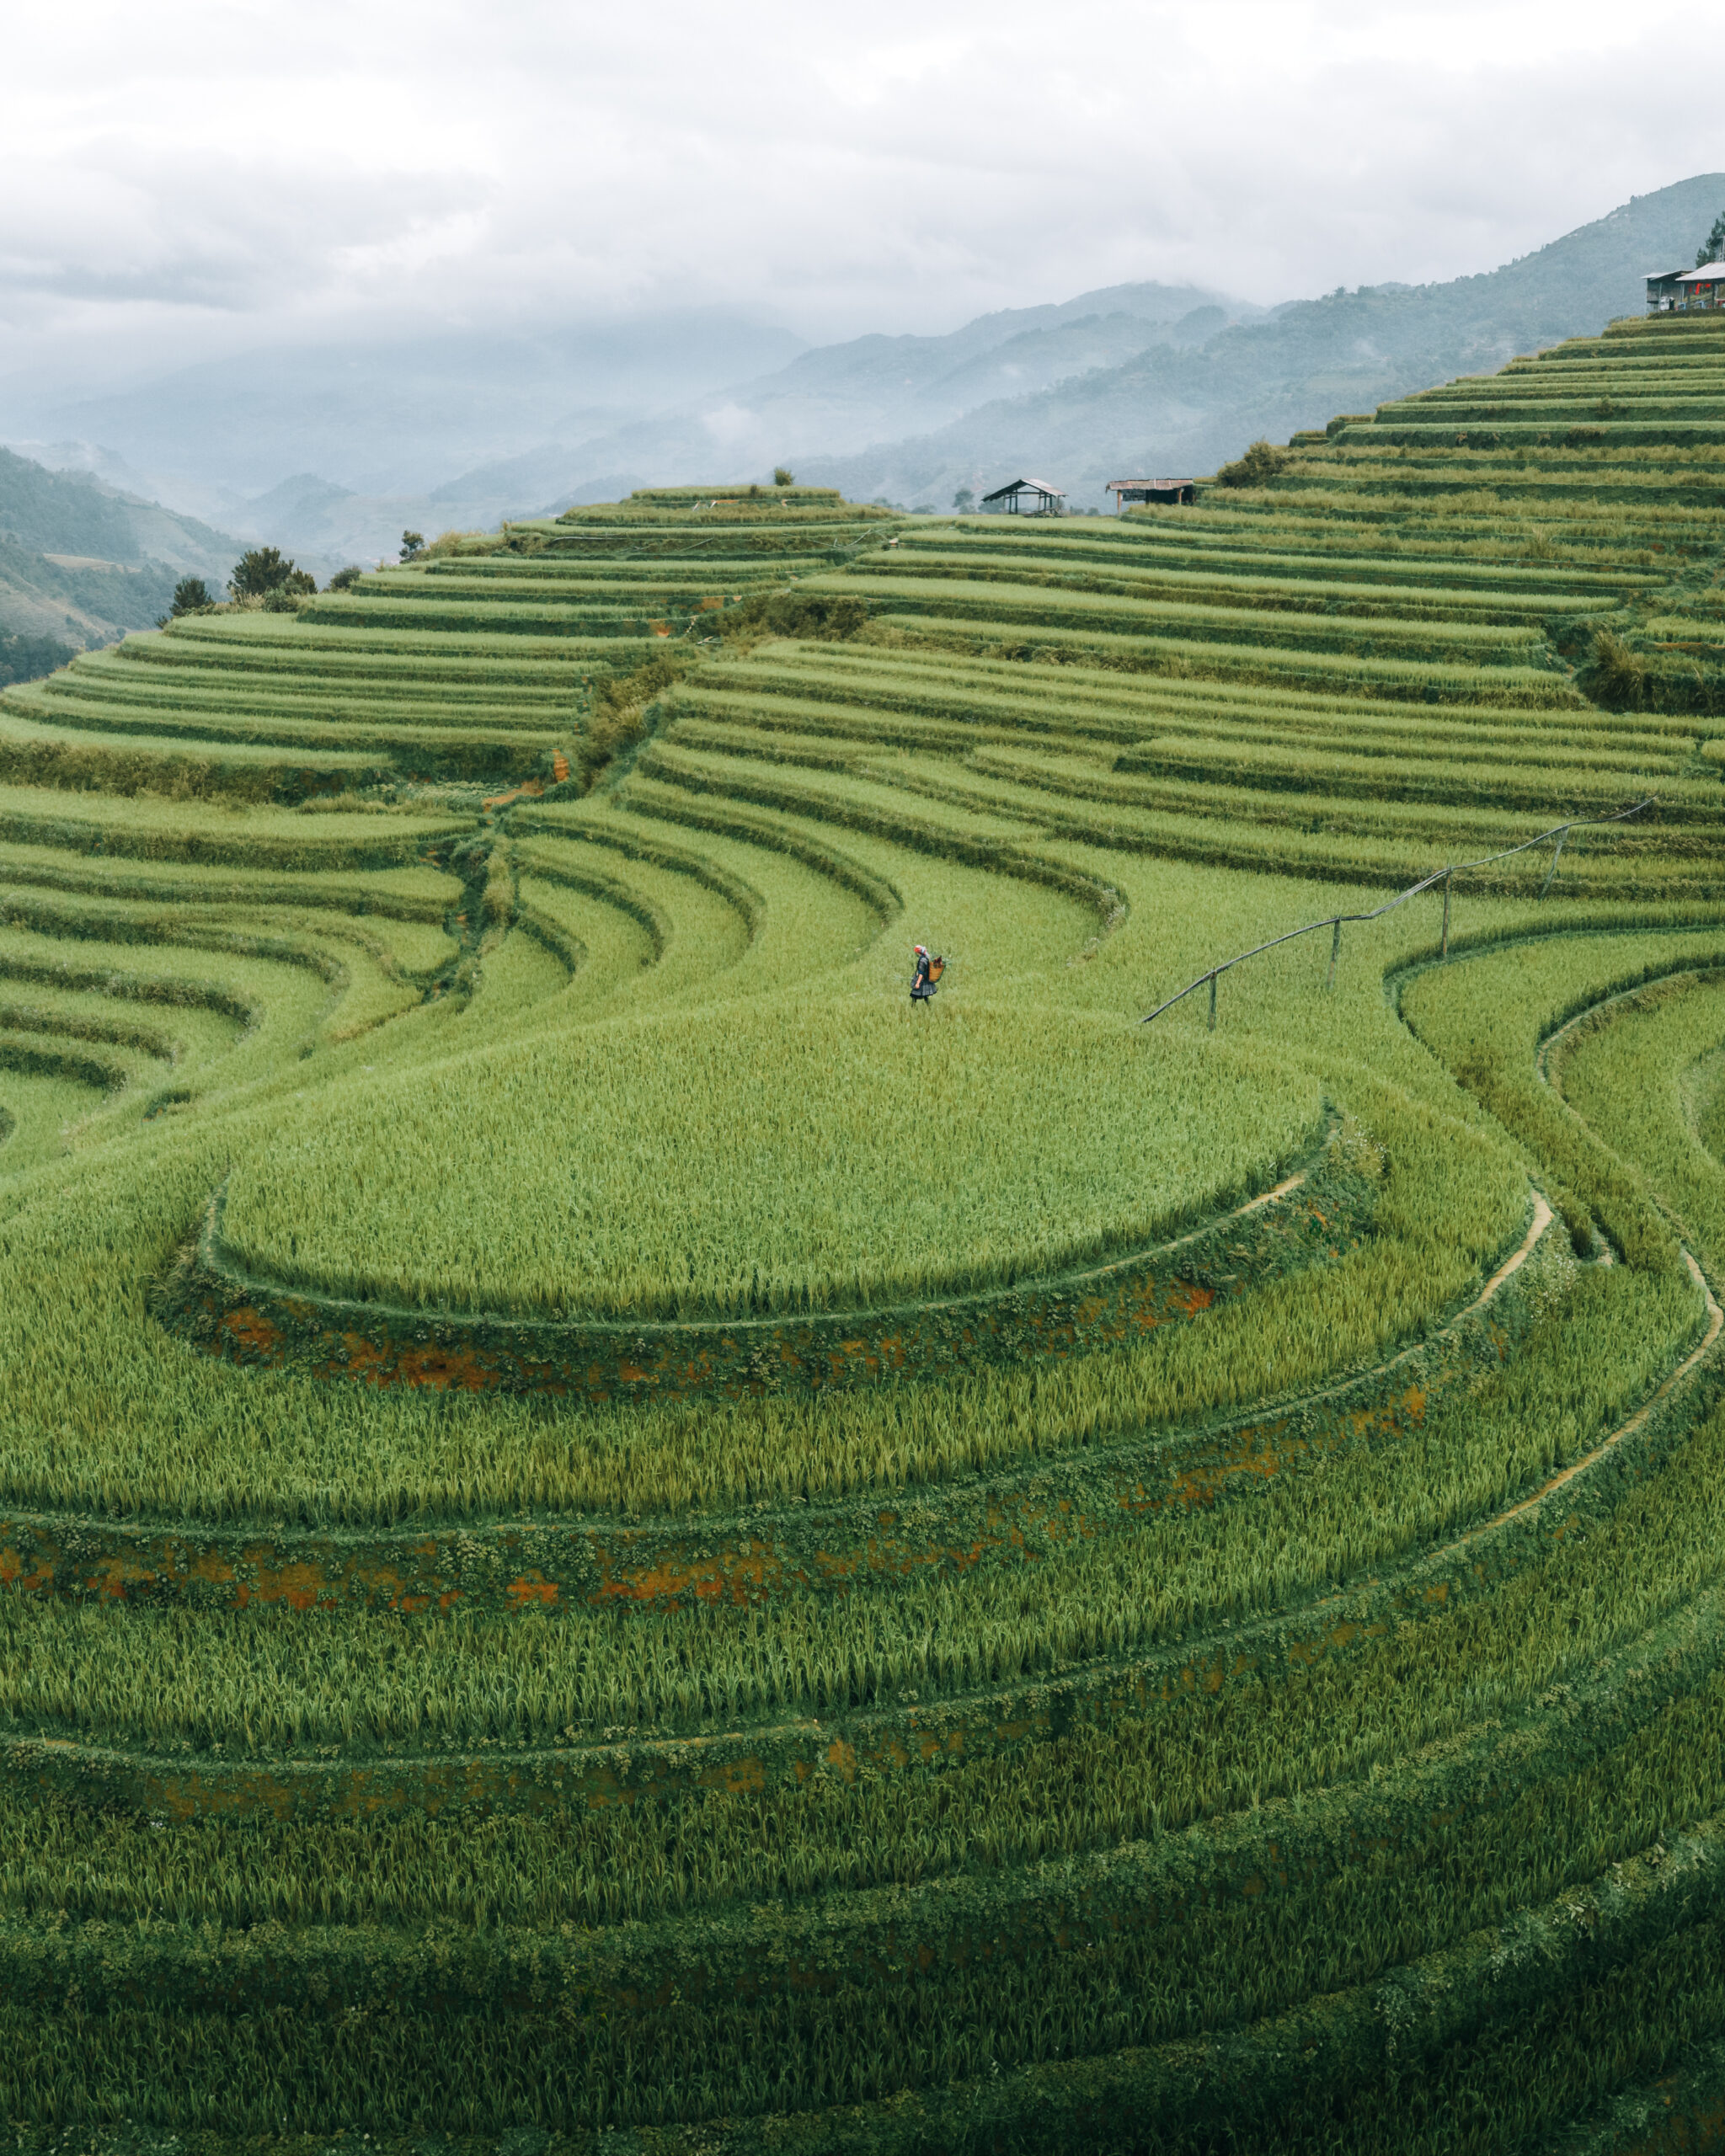 The majestic ha giang rice terraces - Topas travel vietnam - 03